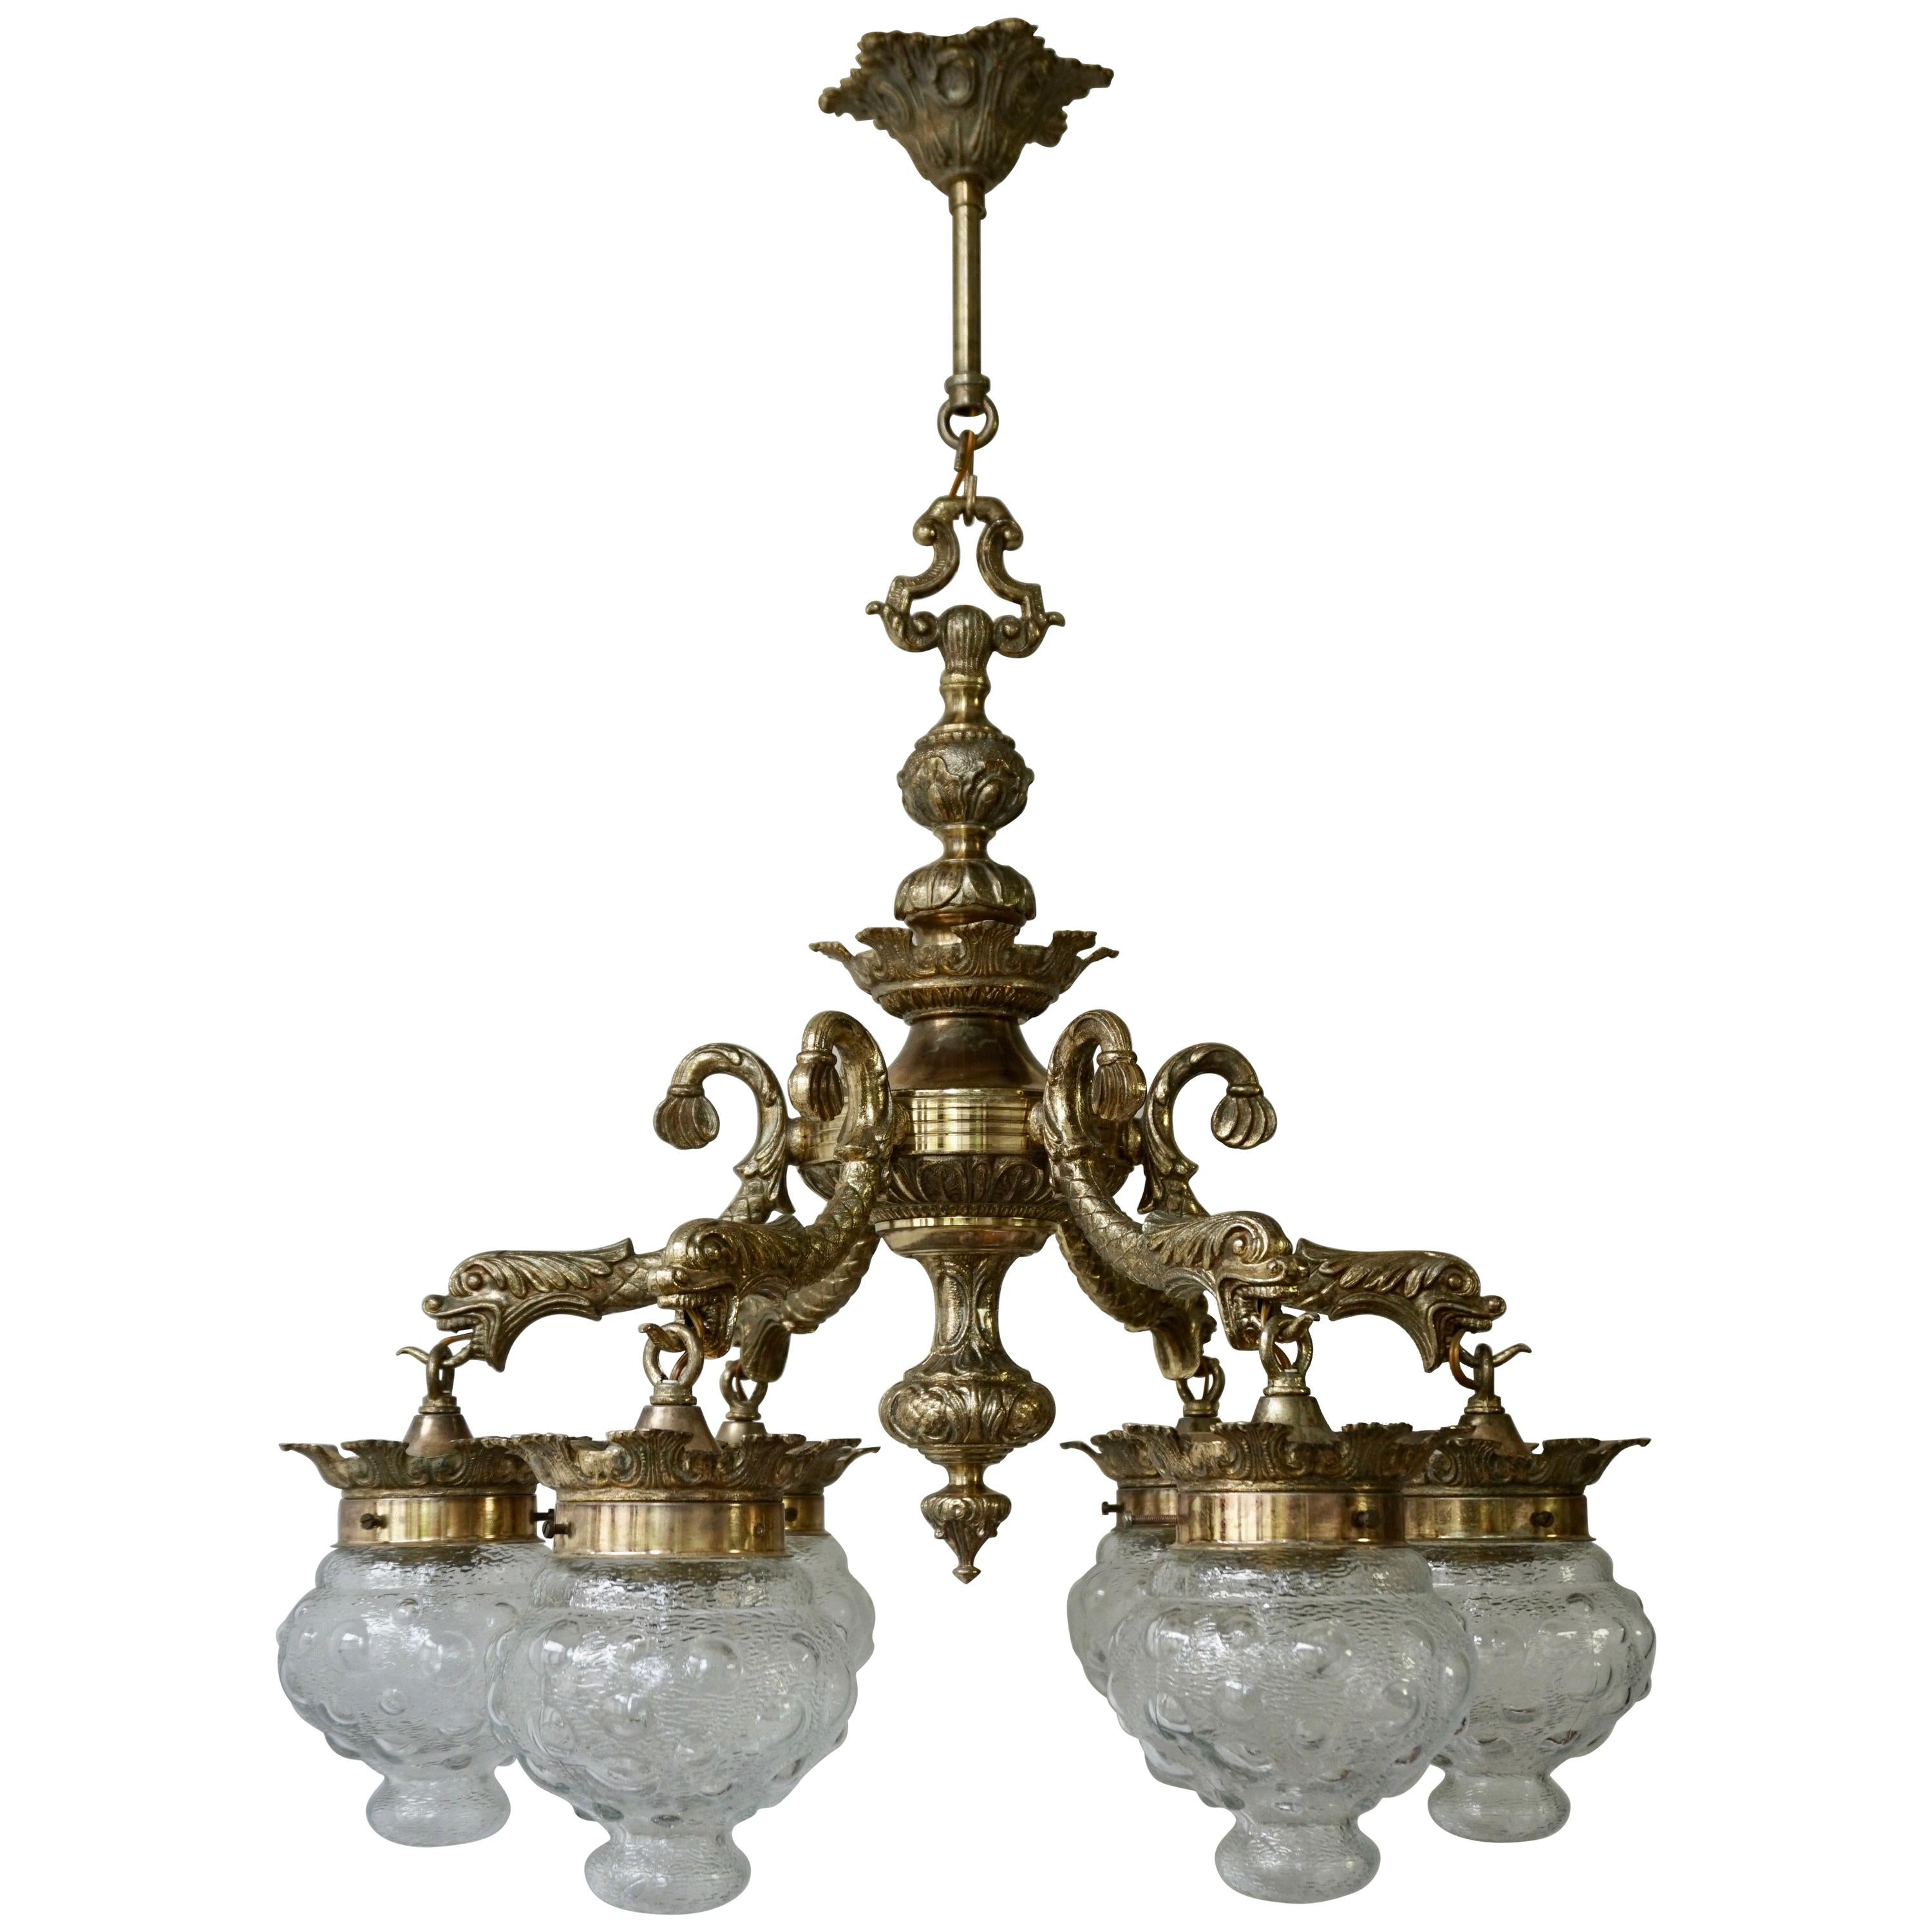 Stunning Brass Chandelier in Gothic or Medieval Style with Dragon Sculptures